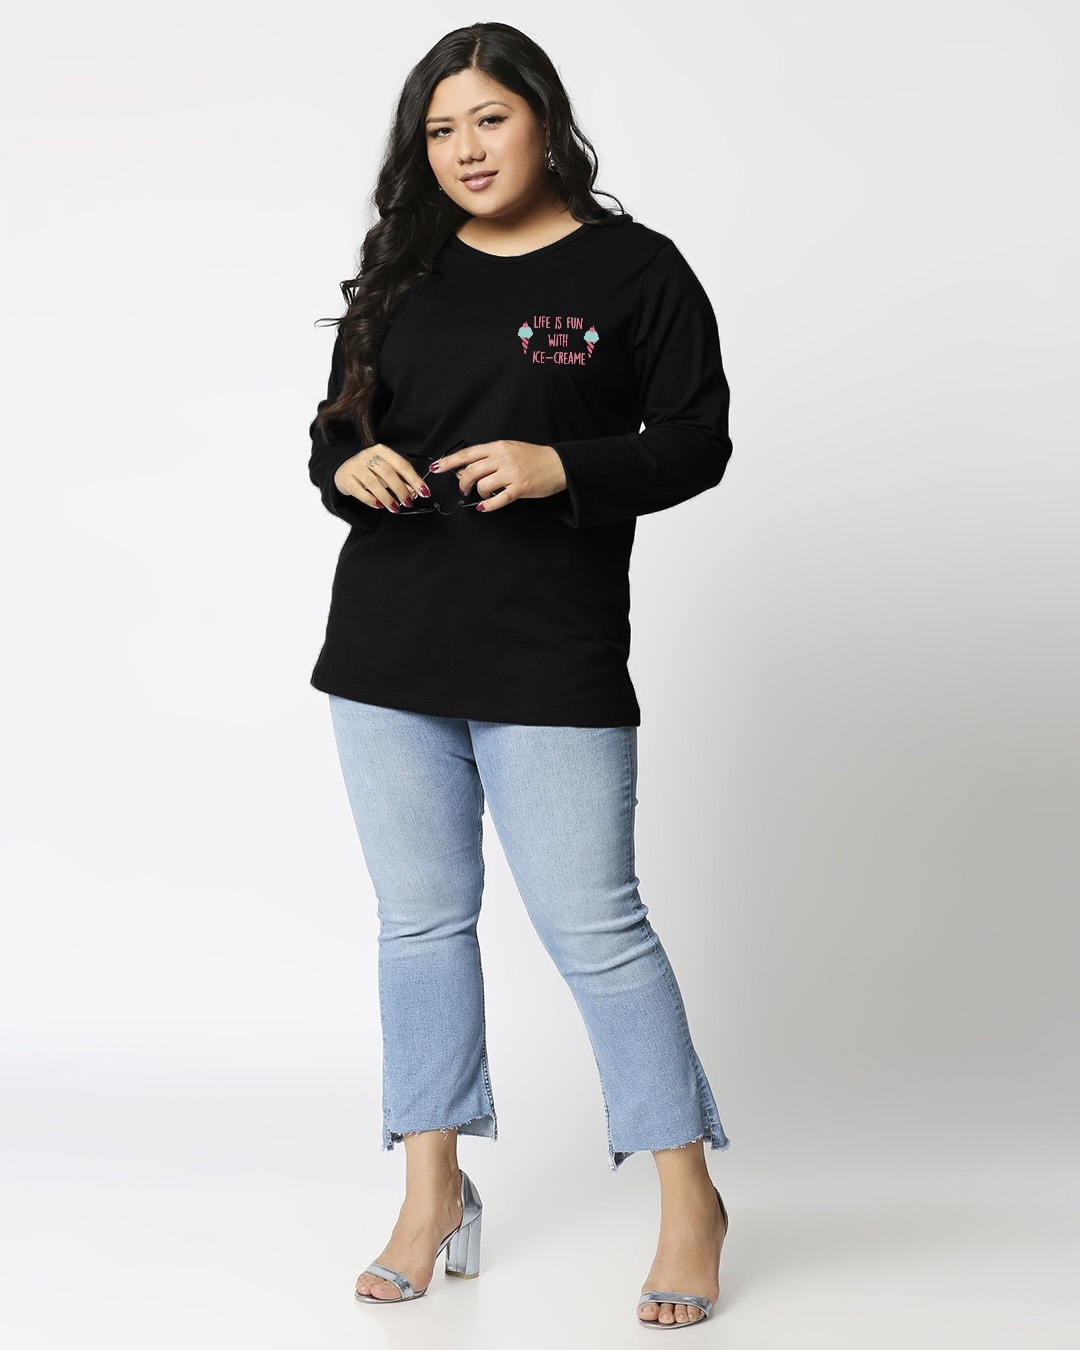 Shop Life's Fun With Ice Cream(TJL) Full Sleeve Plus Size T-Shirt